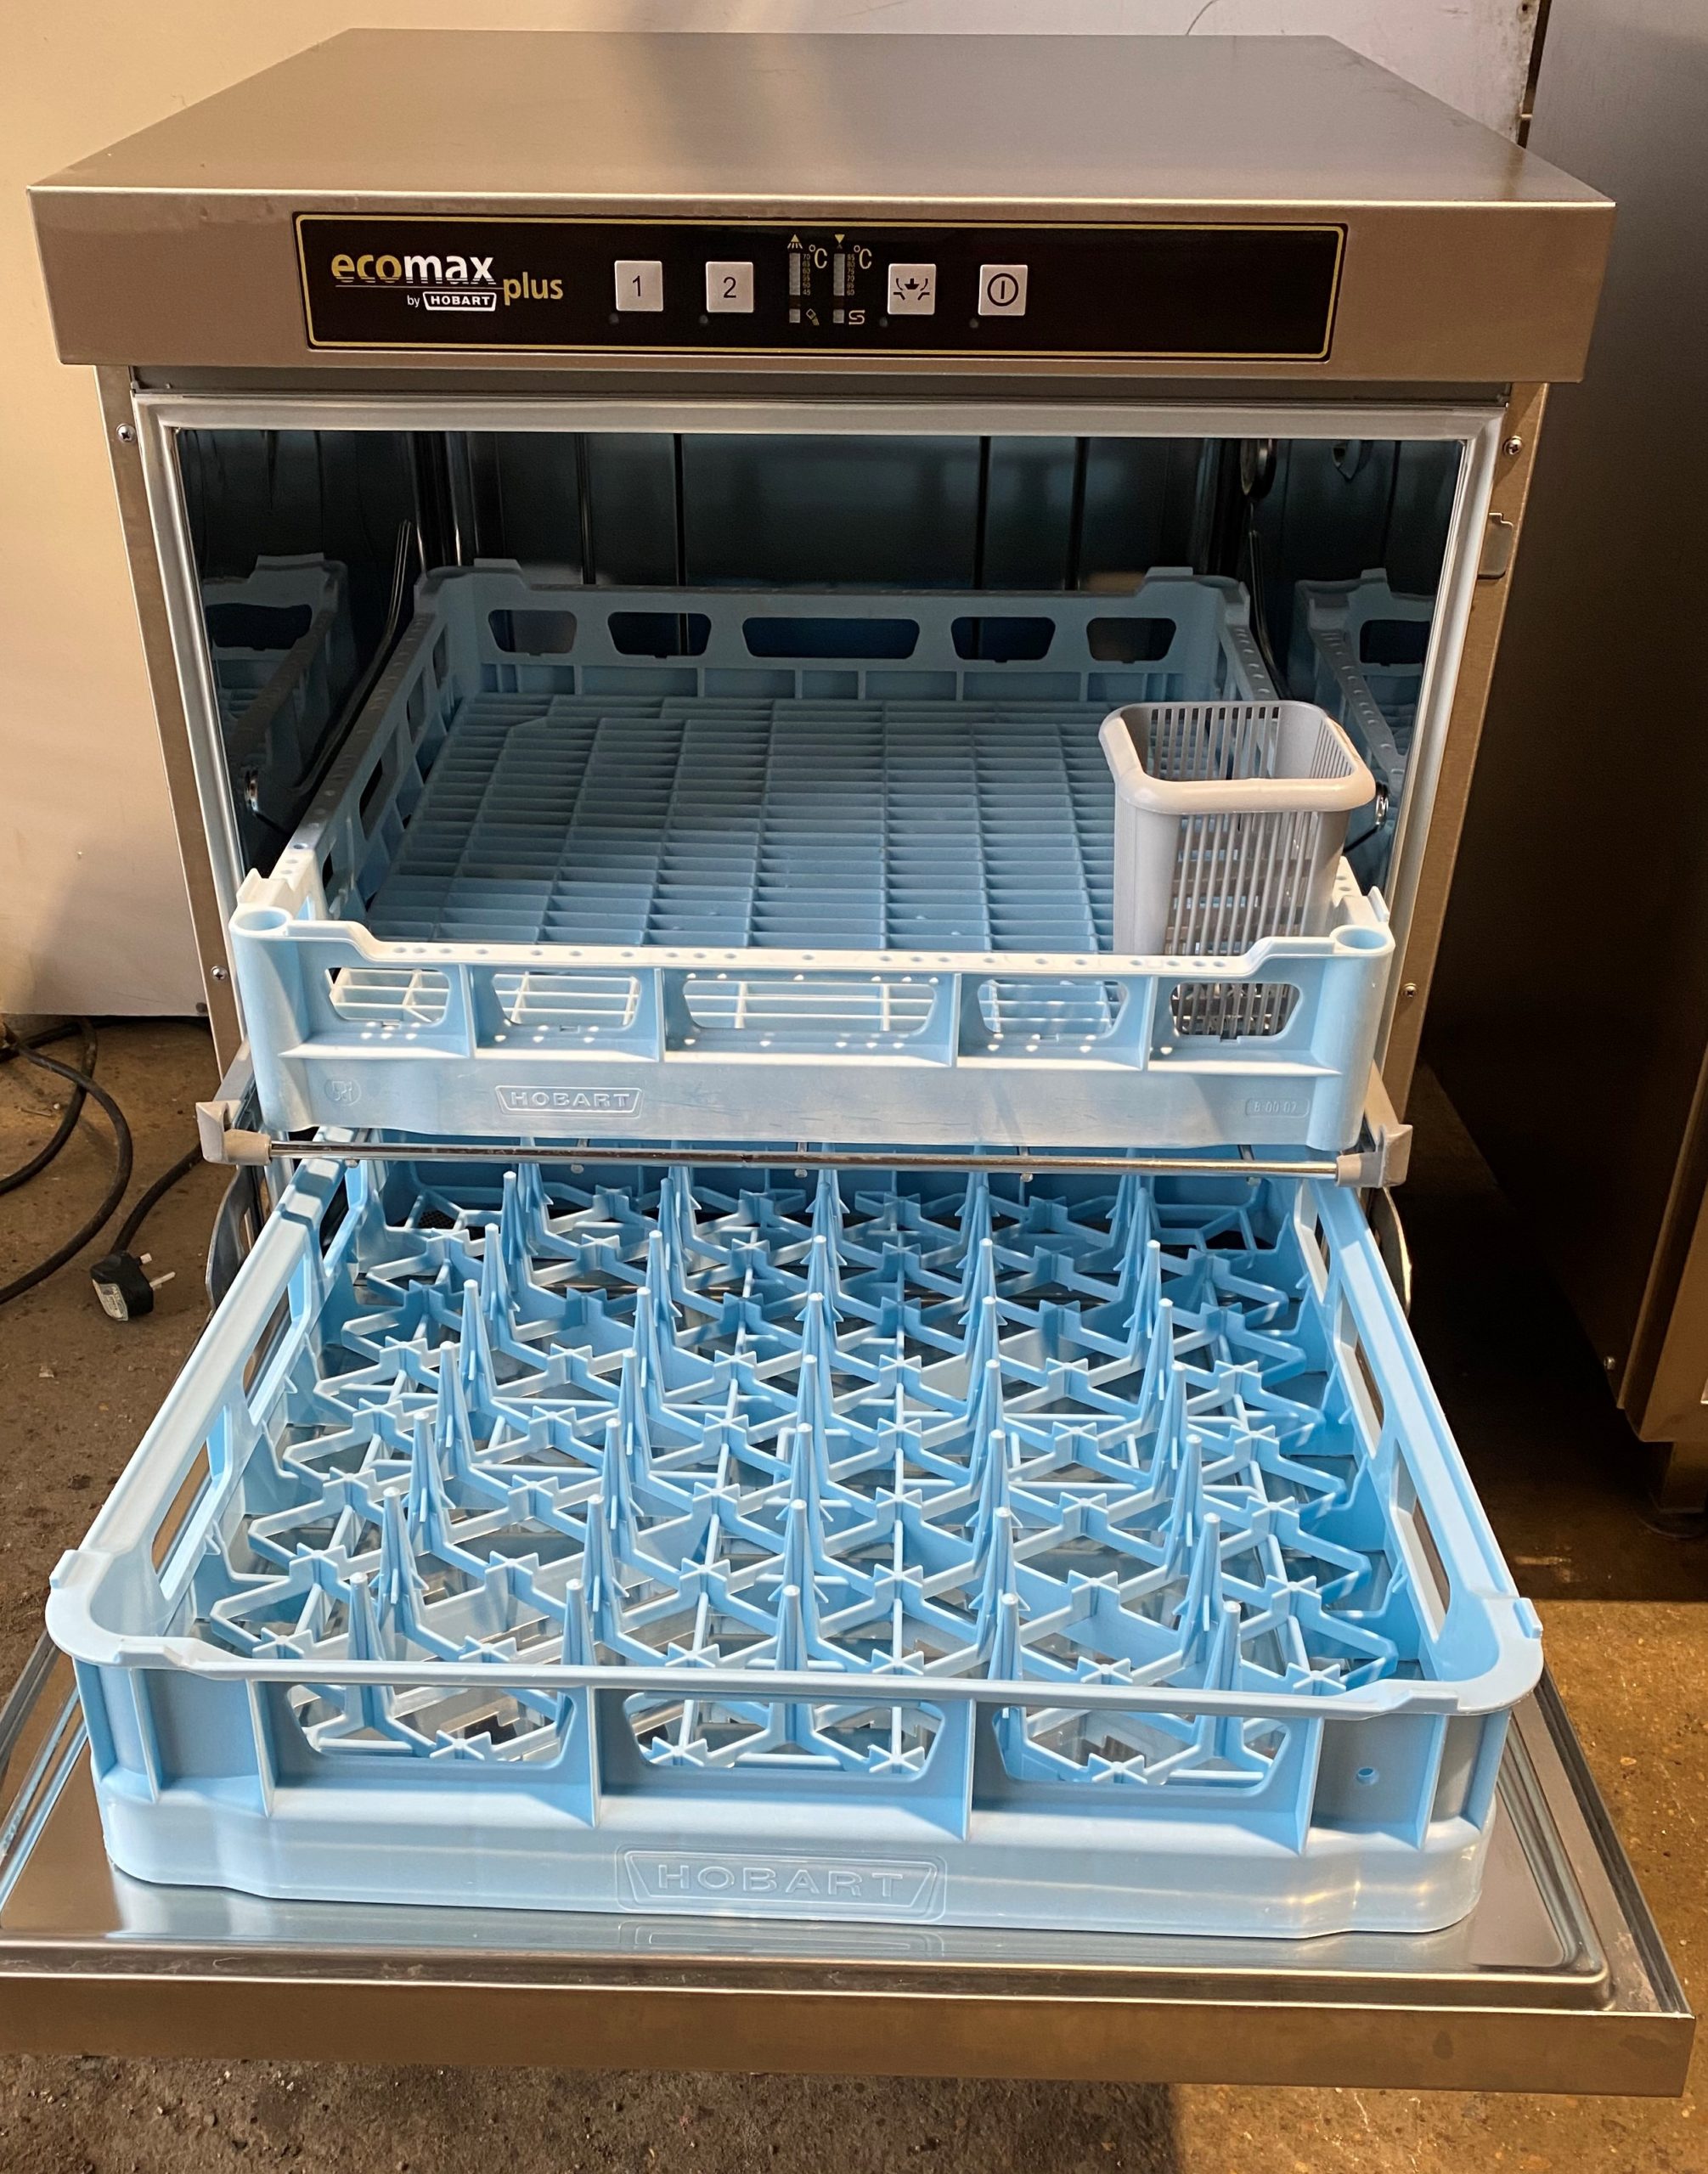 HOBART Ecomax 503S-10A Under Counter Dish Washer – Double rack model!